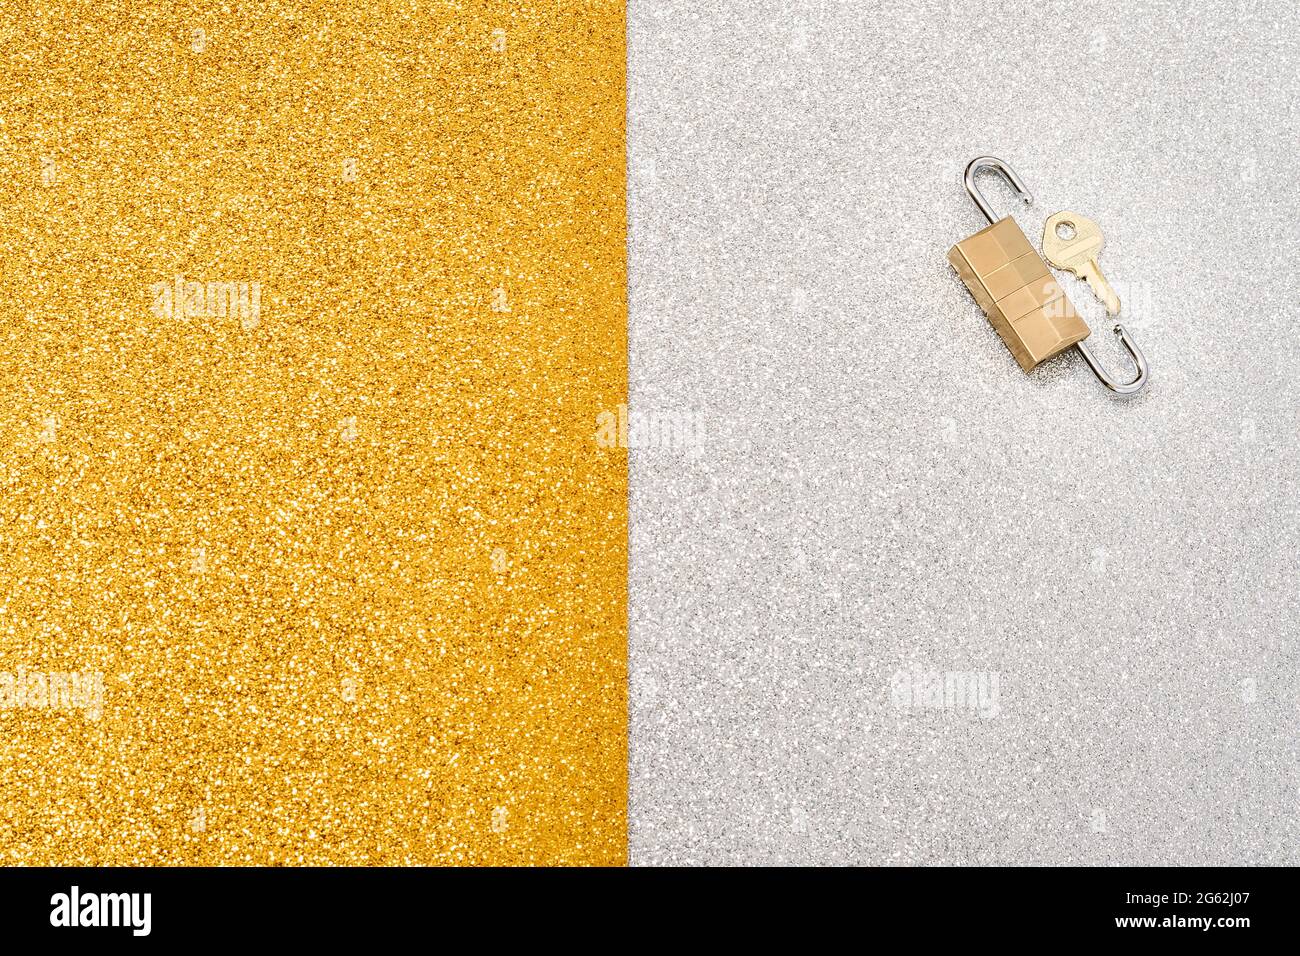 Photo of two padlocks and a small key on a silver and gold background that pretends to show a message.The photo has copy space for text or whatever yo Stock Photo